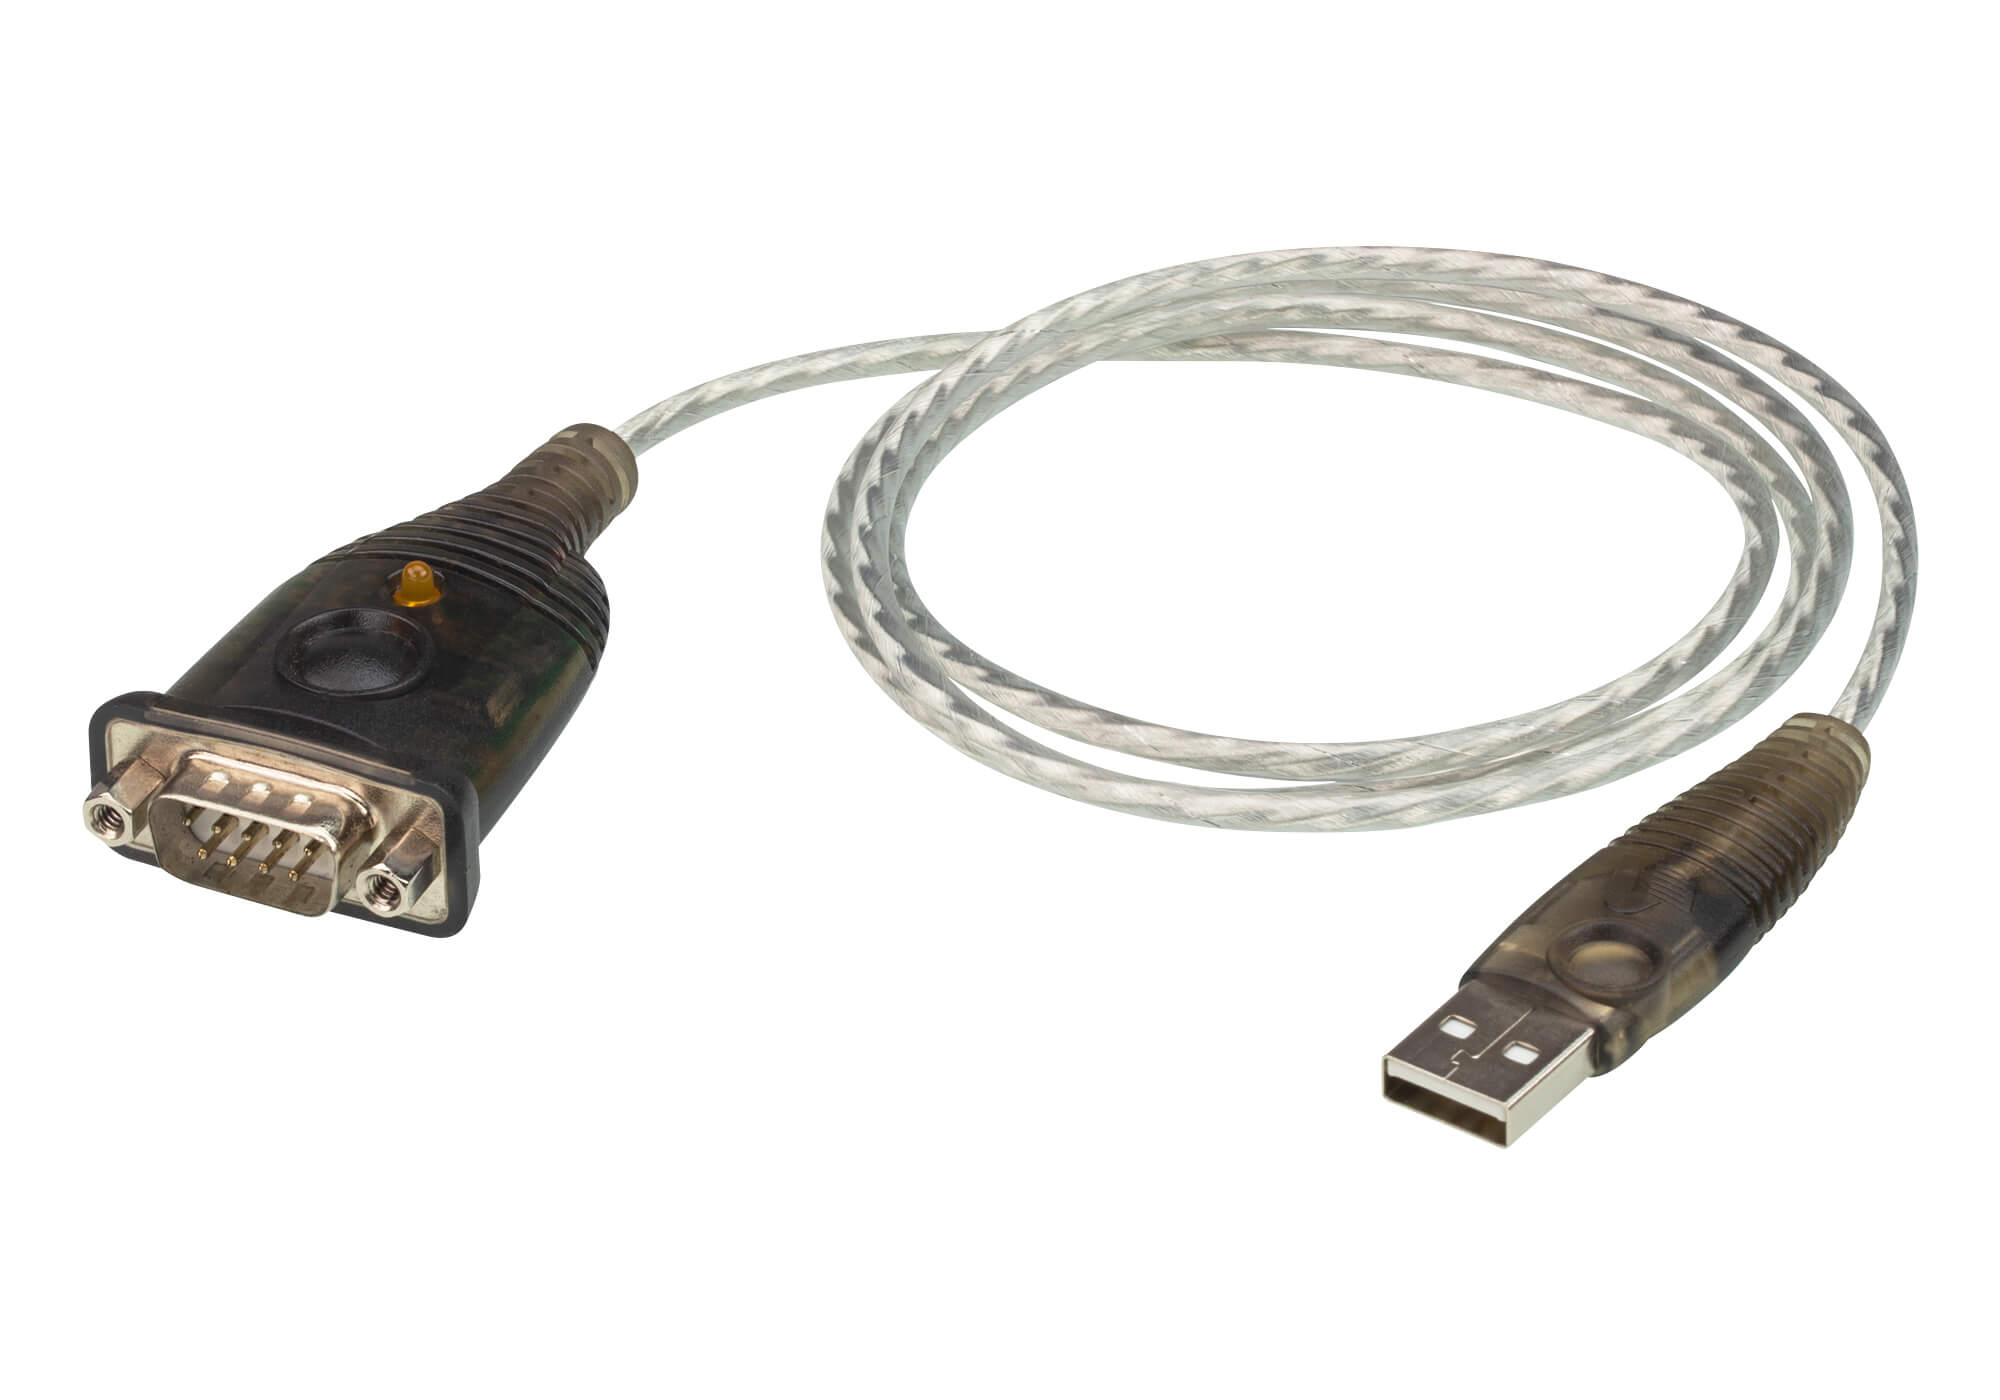 ATEN USB to RS232 converter with 1m cable， 921.6 Kbps Transfer Rate, Compatible with Windows, Mac, Linux